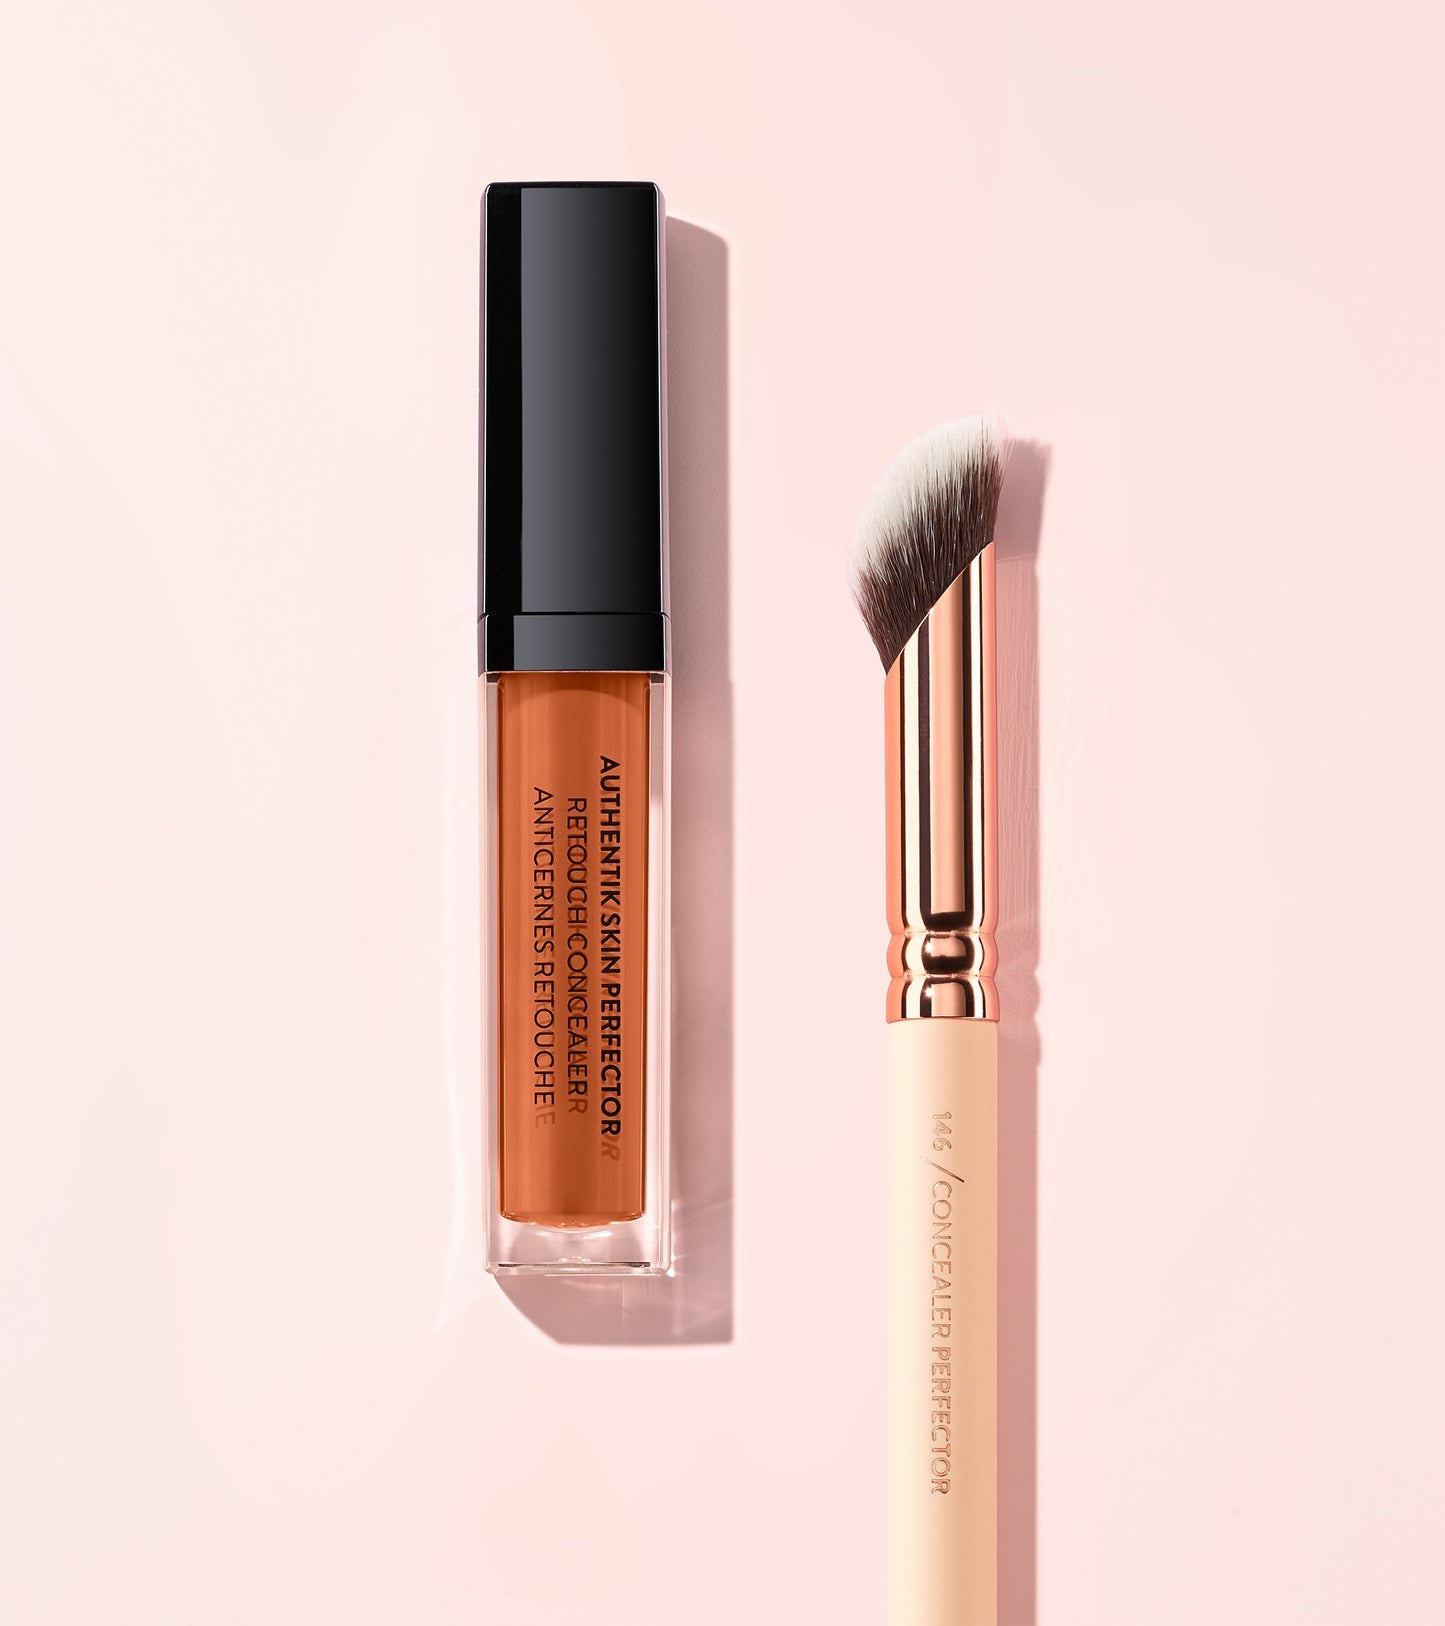 AUTHENTIK SKIN PERFECTOR CONCEALER (300 VALID) Expanded Image 3